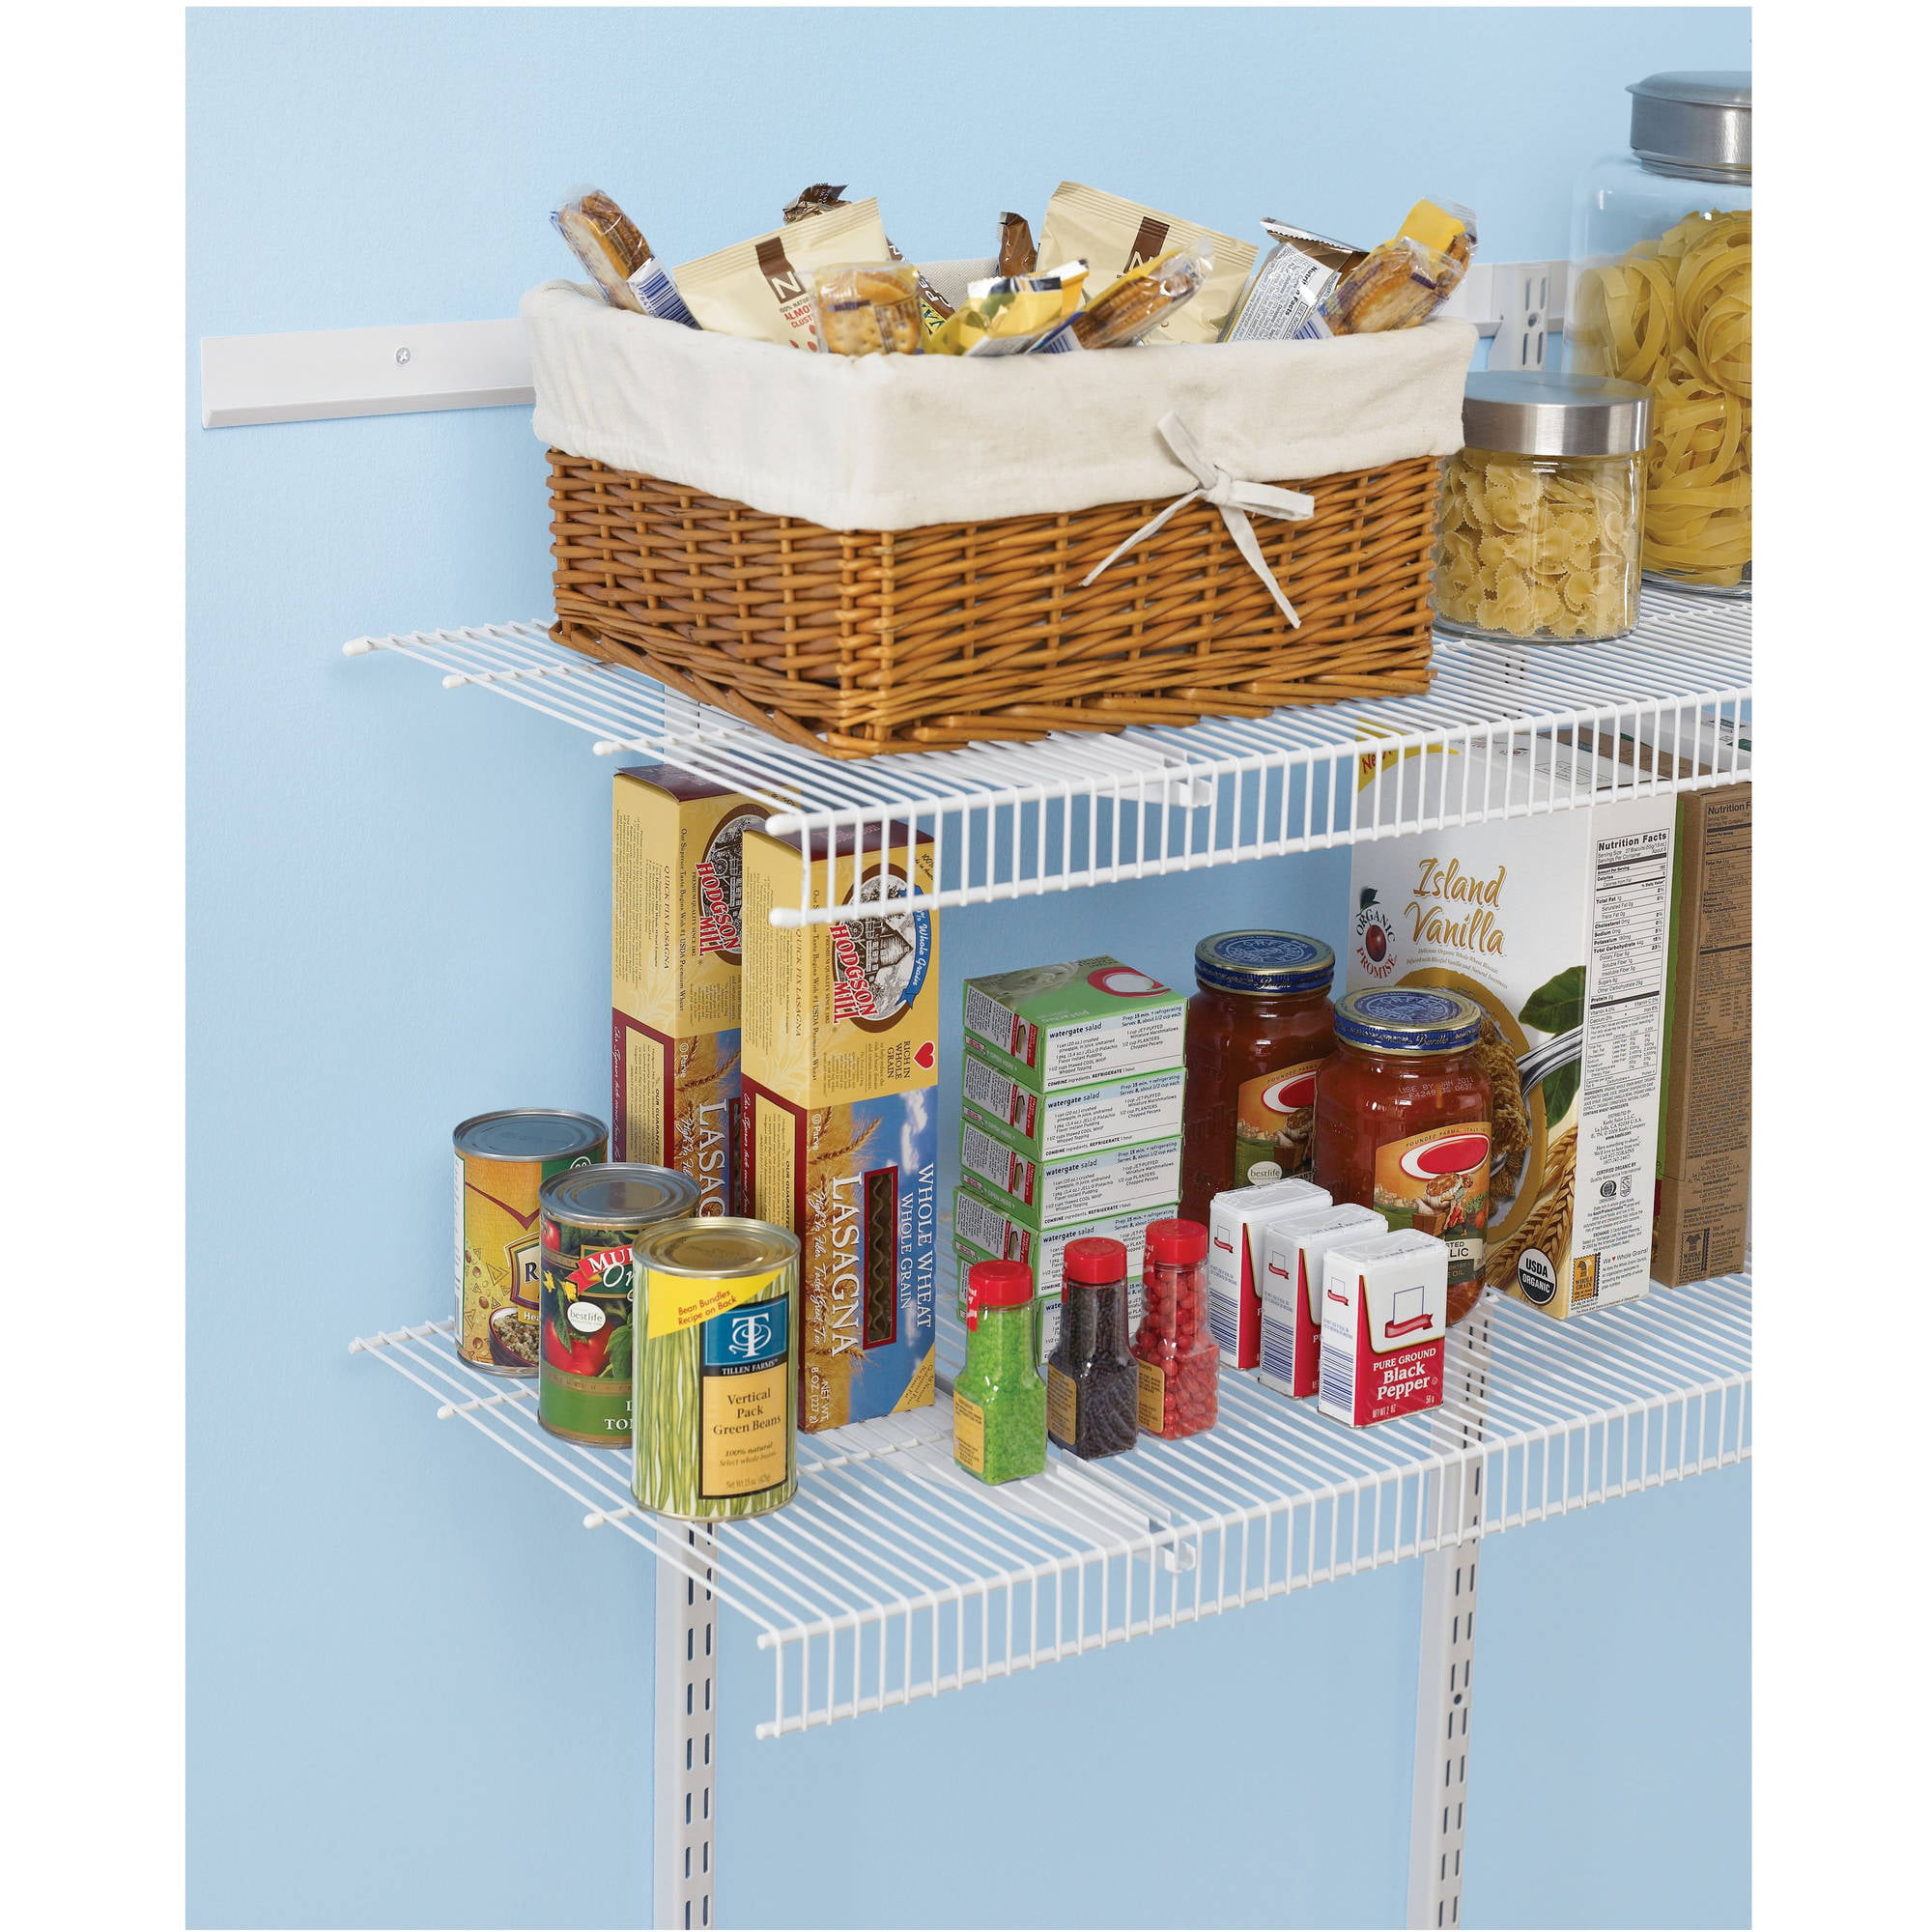 QuikTRAY Rollout Complete 6 Shelf Pantry Kit